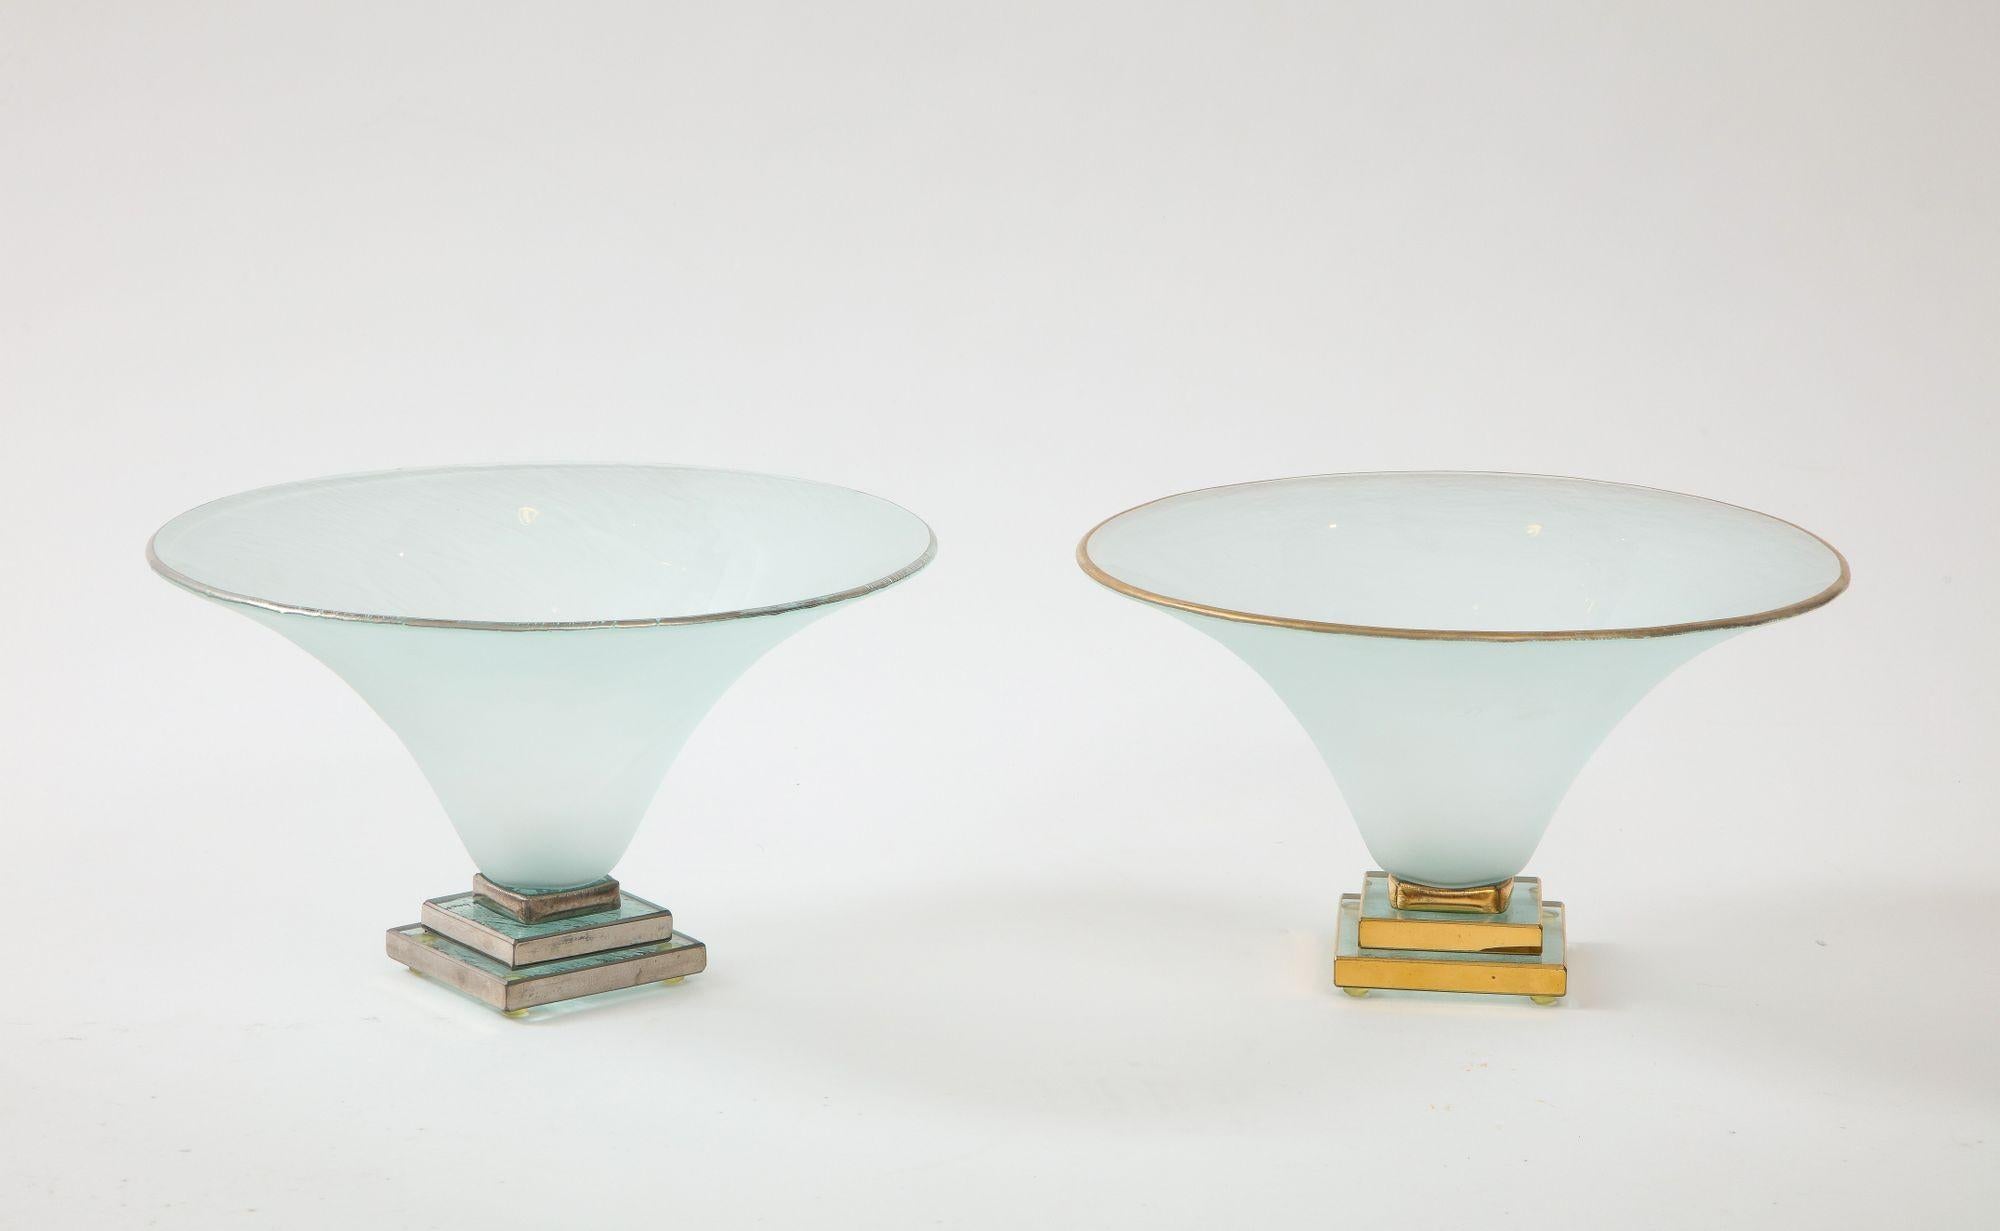 A wonderful set of two footed bowls in opaque glass on a tiered foot gilded in 24 kt gold and silver.